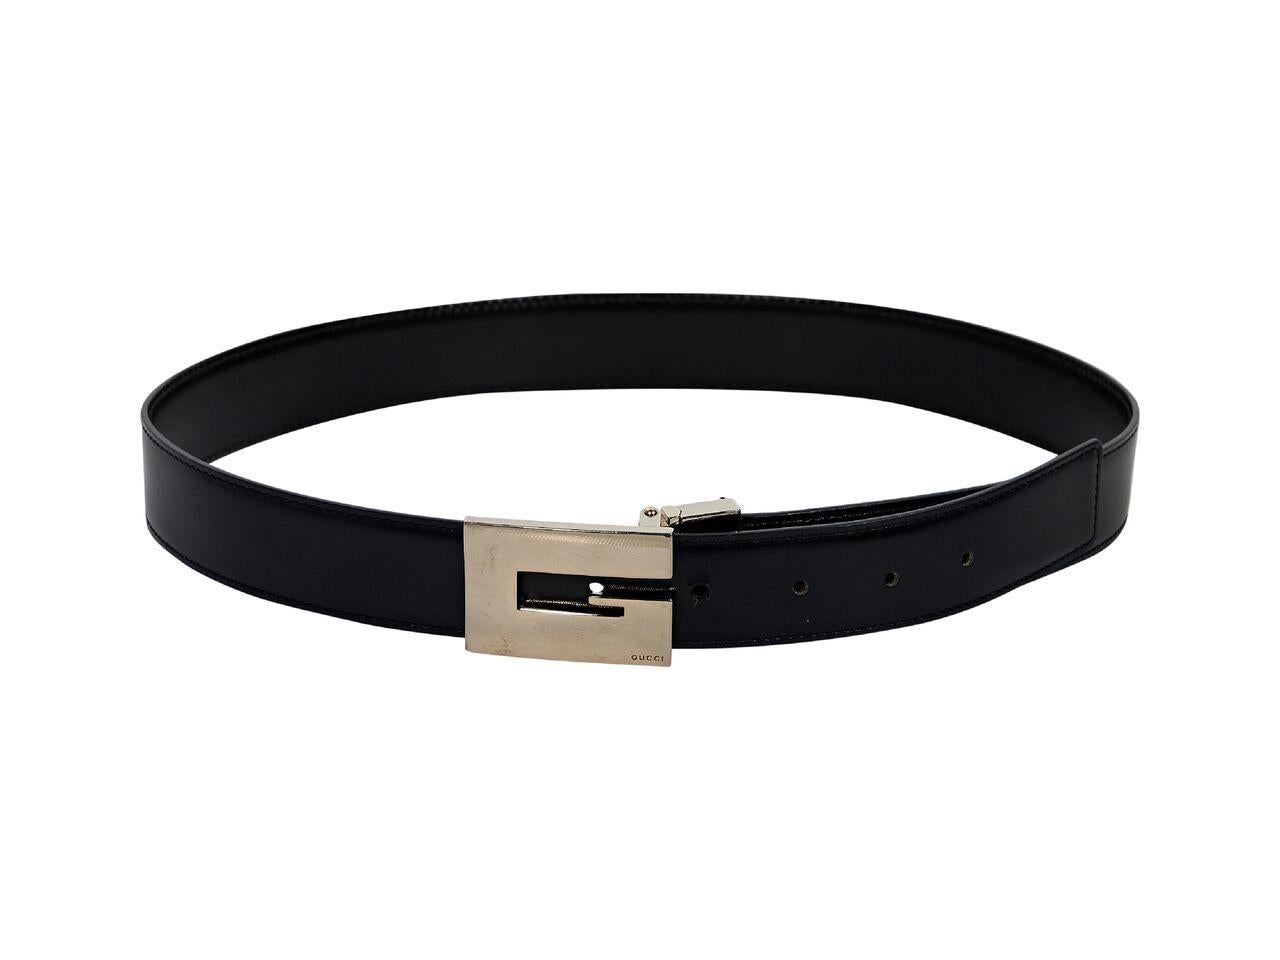 Black Gucci Leather Square Buckle Belt im Zustand „Gut“ in New York, NY